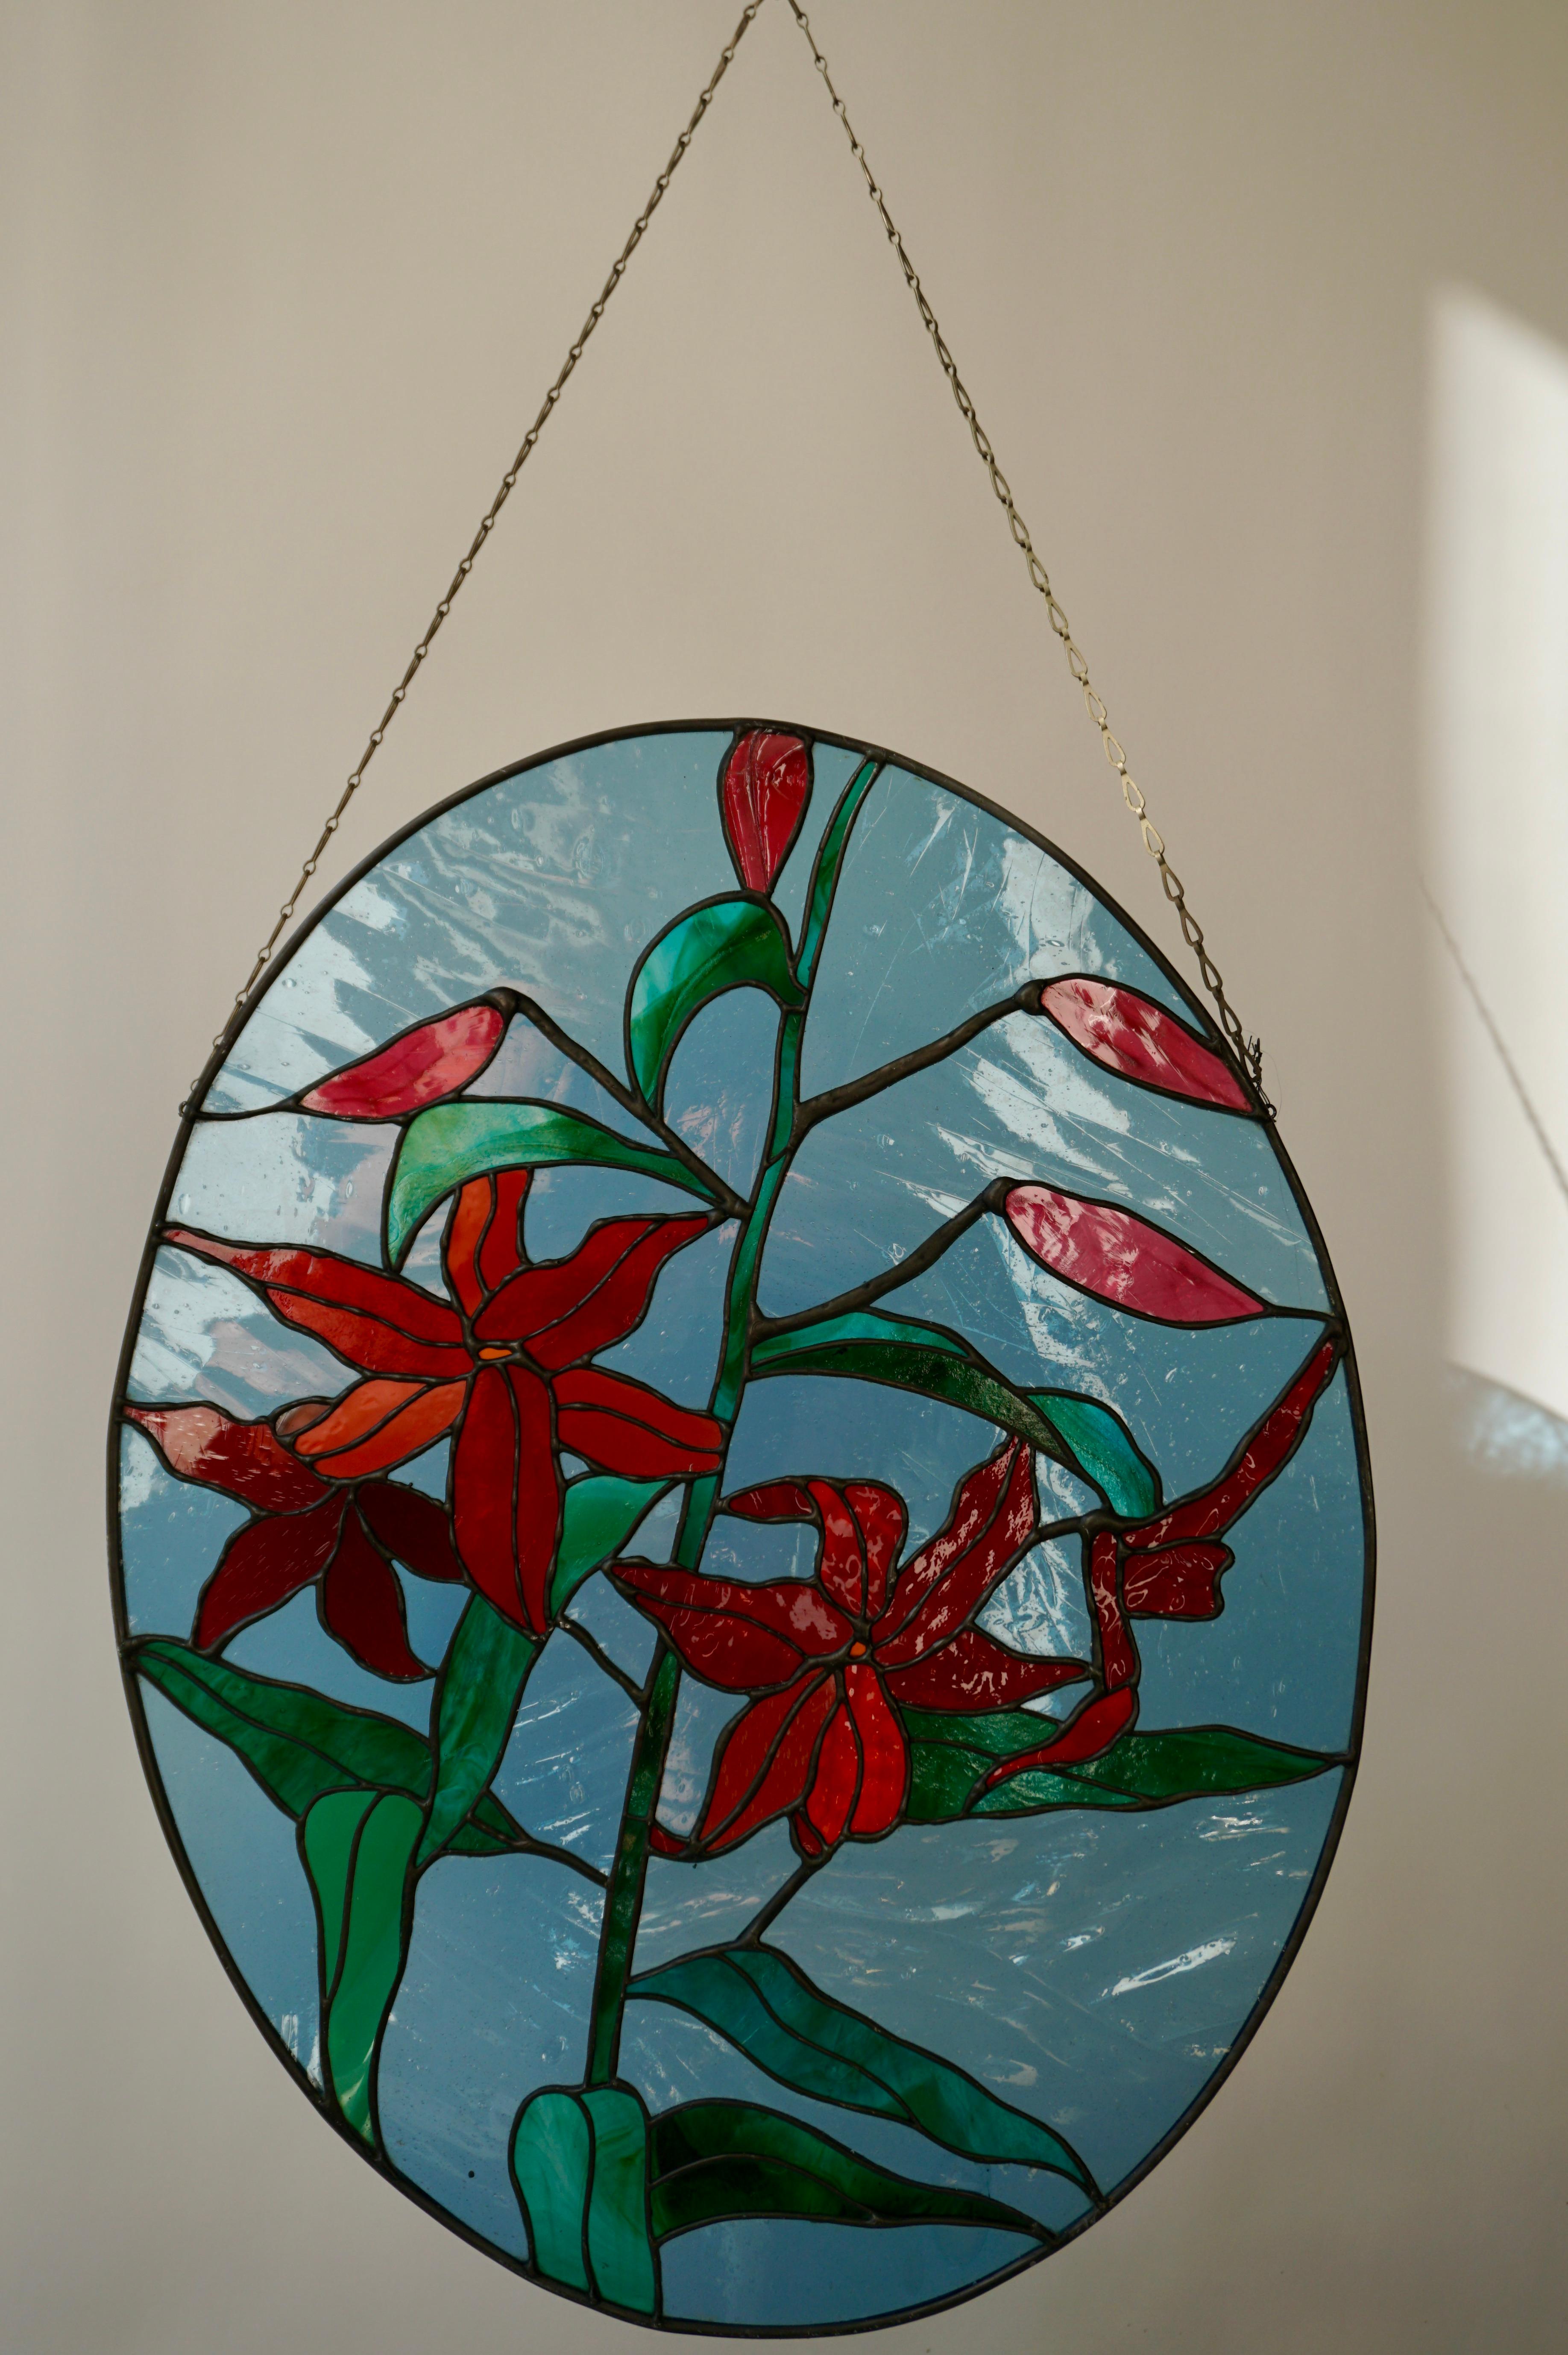 Beautiful 20th century oval stained-glass window panel with red flowers in vibrant colors.
Signed 